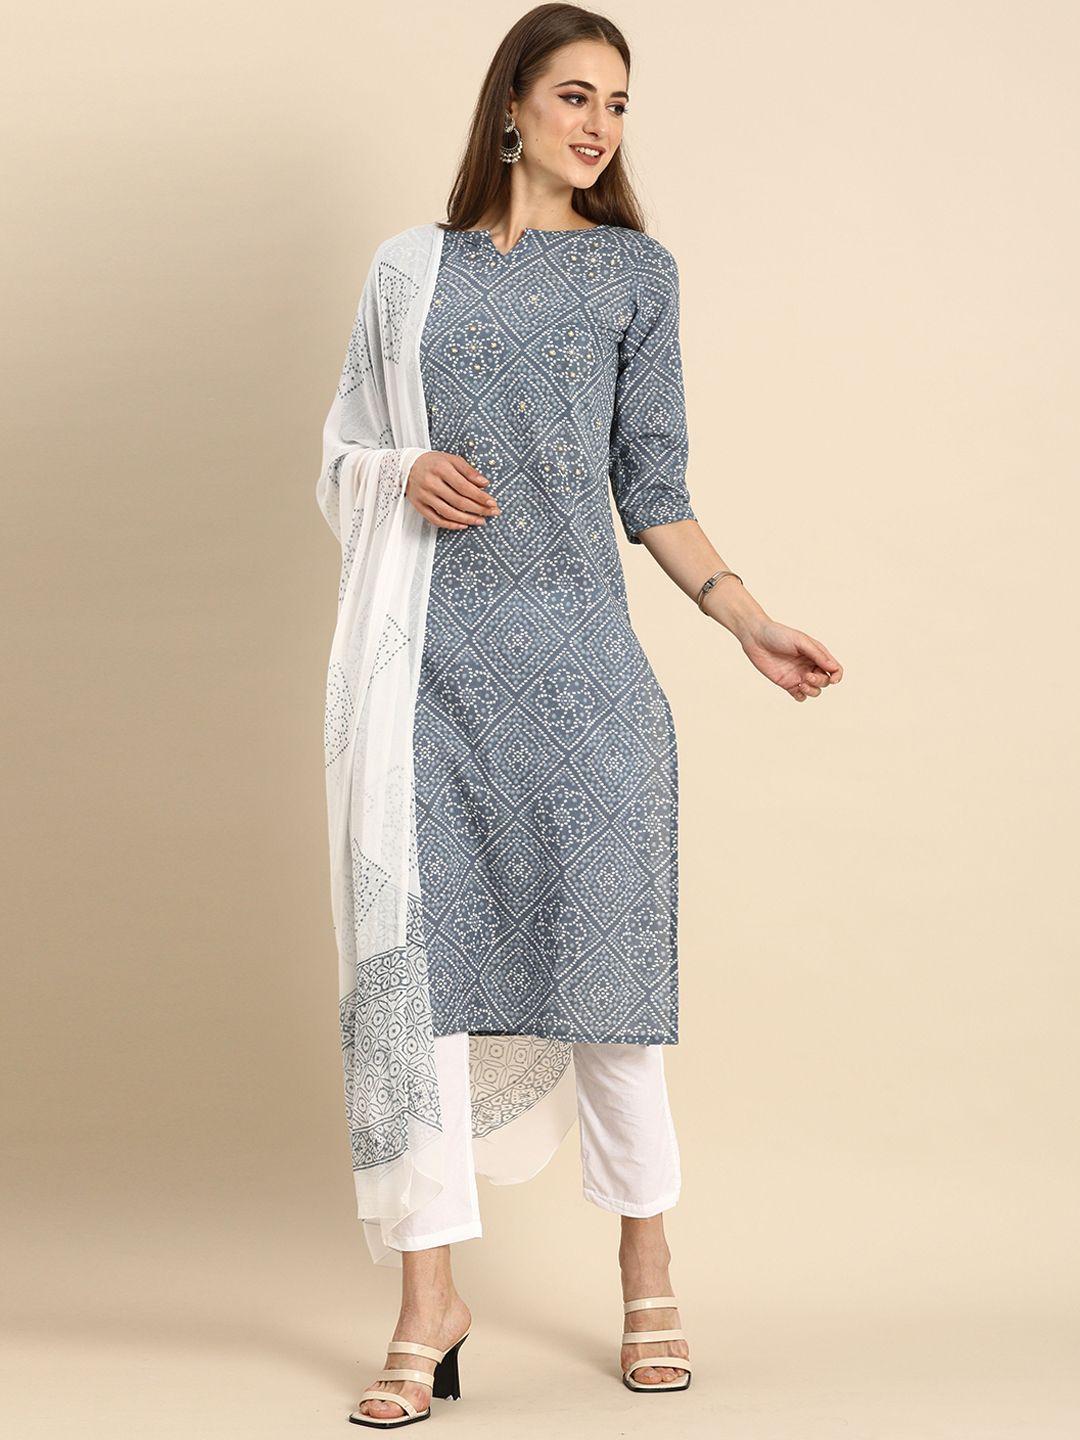 roly poly bandhani printed beads & stones pure cotton kurta with trousers & dupatta